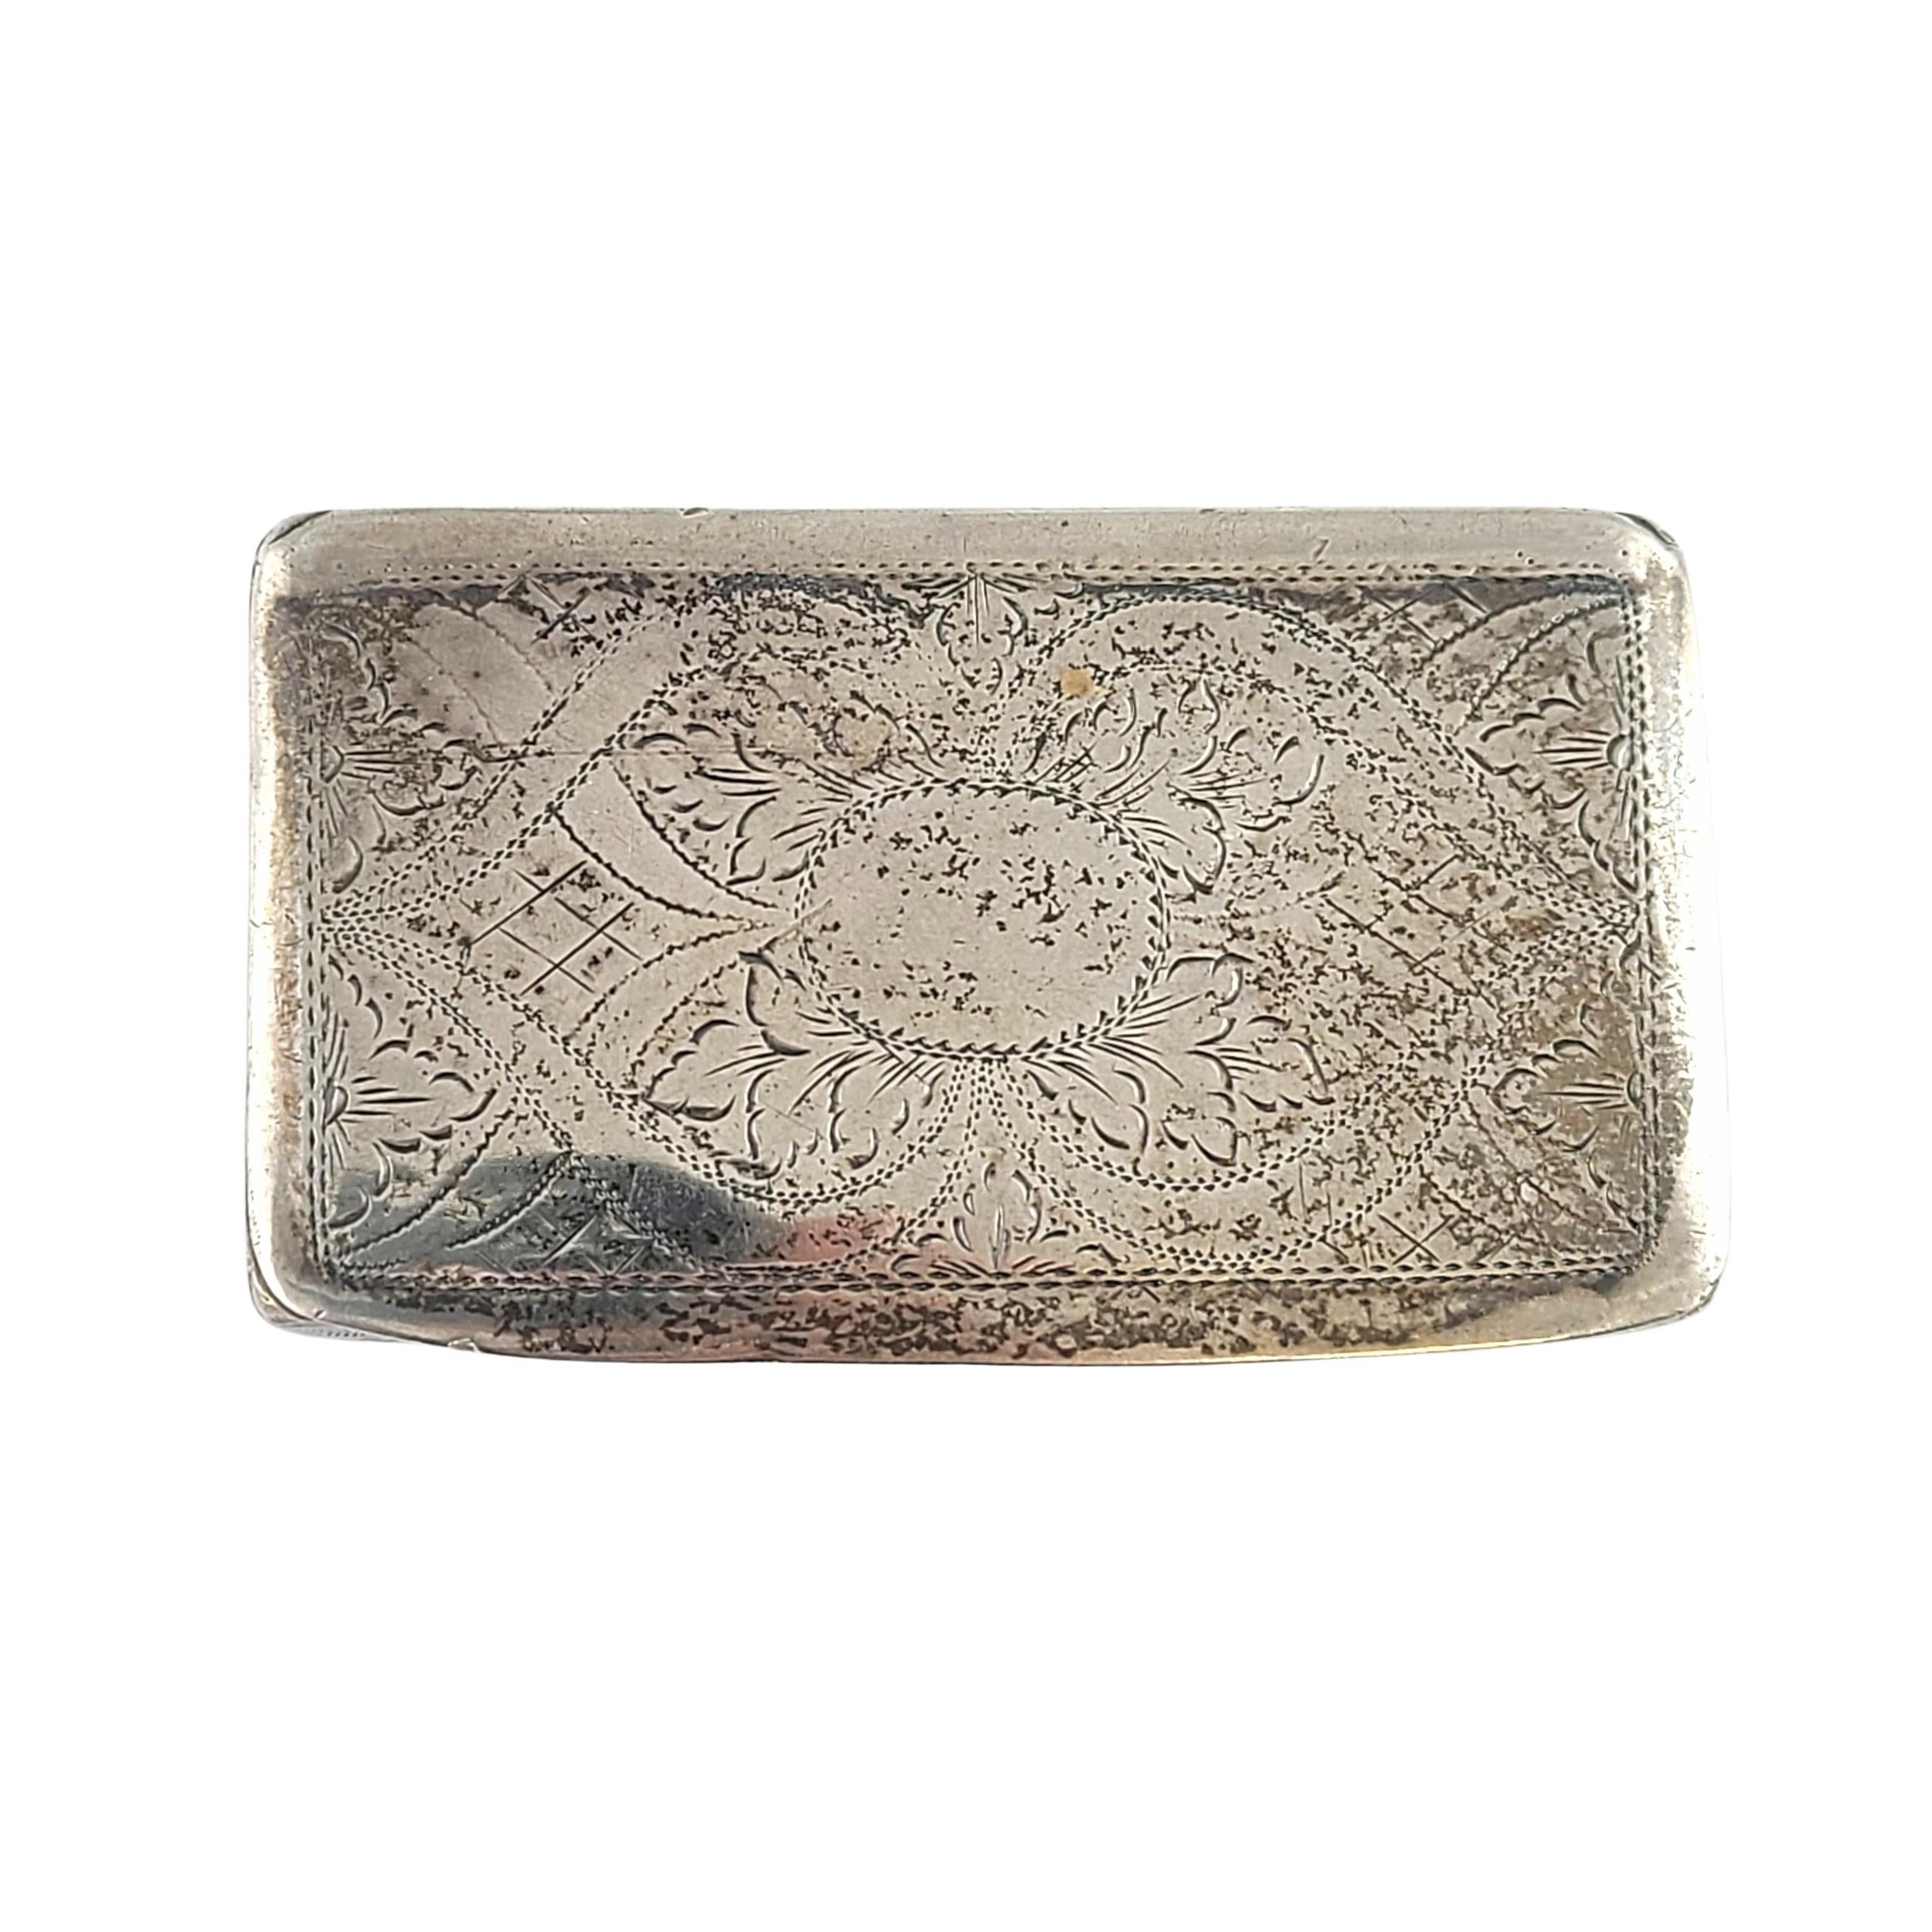 Sterling silver box by Edward Smith of Birmingham, England, circa 1828.

No monogram.

Beautiful small rectangular box featuring an etched design on the hinged lid. A less ornate etched floral design is on the bottom of the box. Gold washed